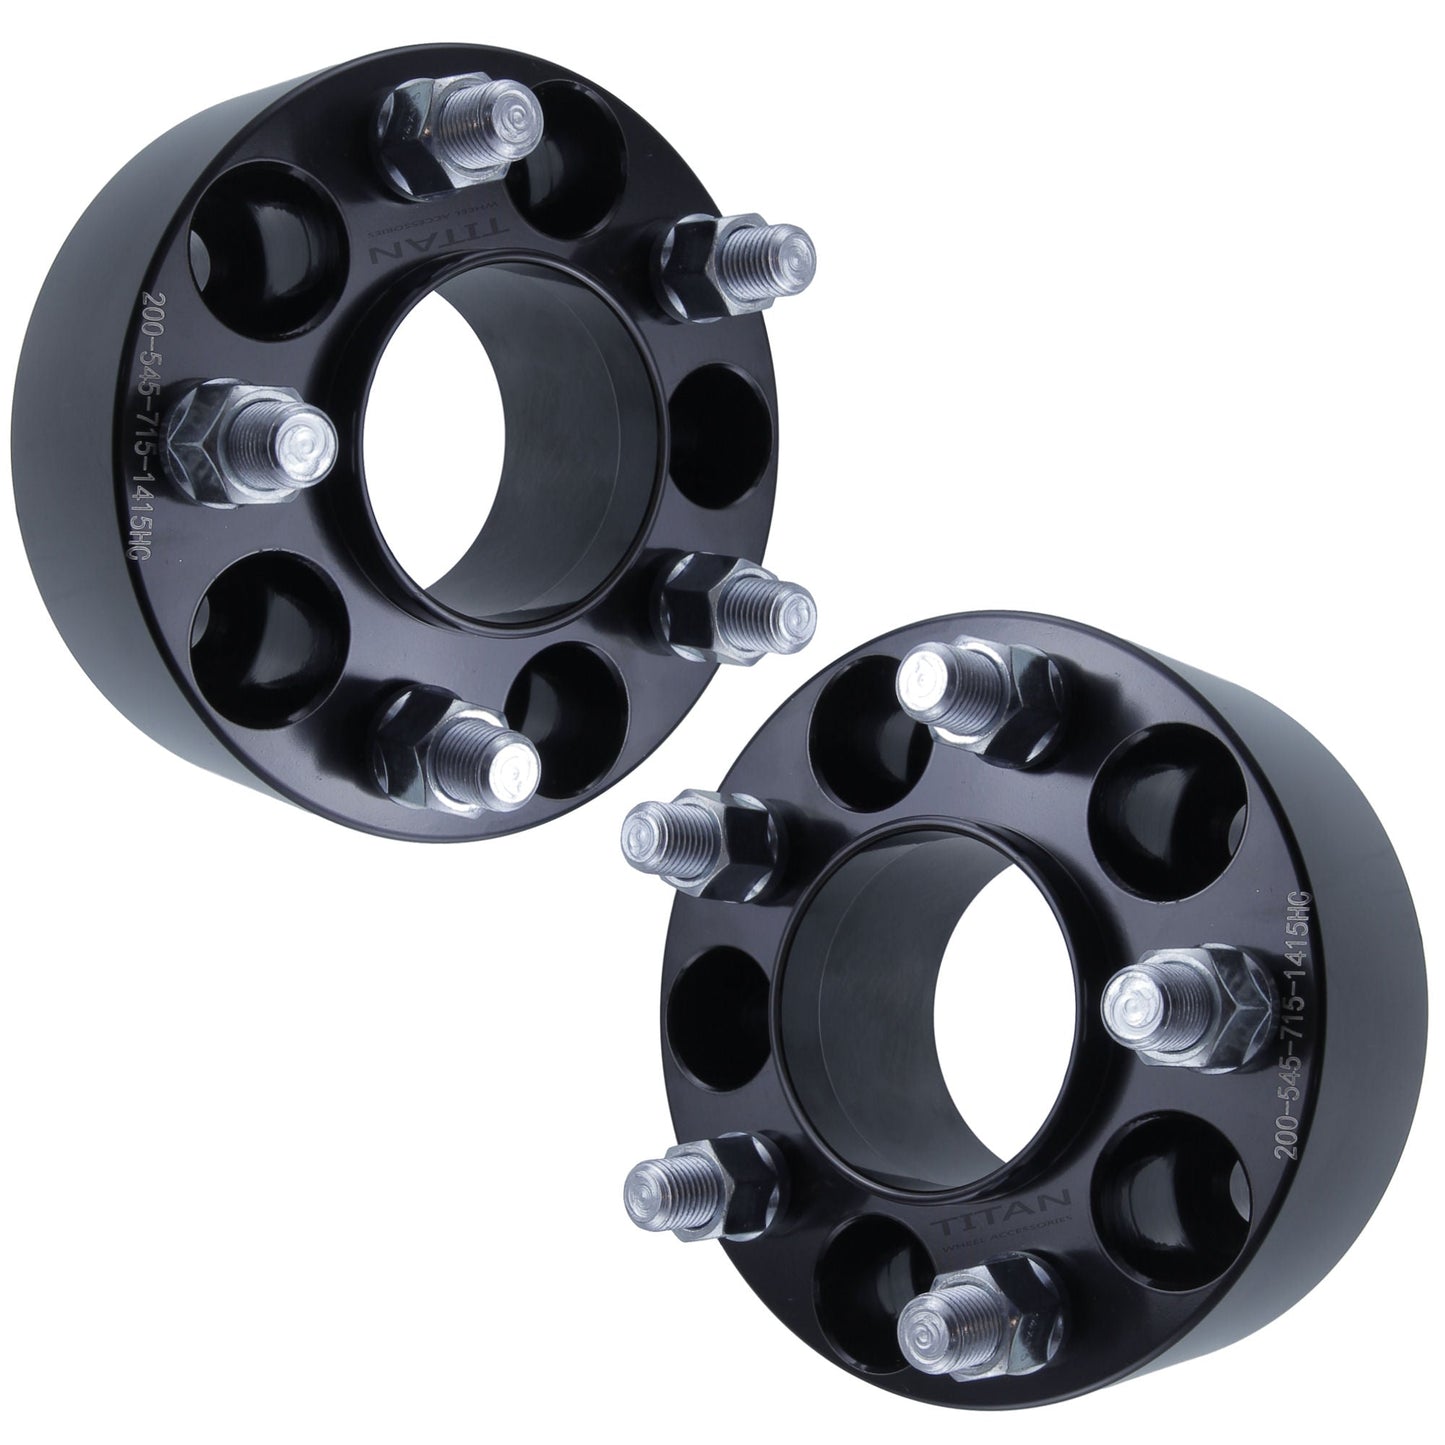 2" (50mm) Titan Wheel Spacers for Dodge Charger Challenger Magnum Chrysler 300 | 5x4.5 (5x114.3) | 71.5 Hubcentric |14x1.5 Studs |  Set of 4 | Titan Wheel Accessories